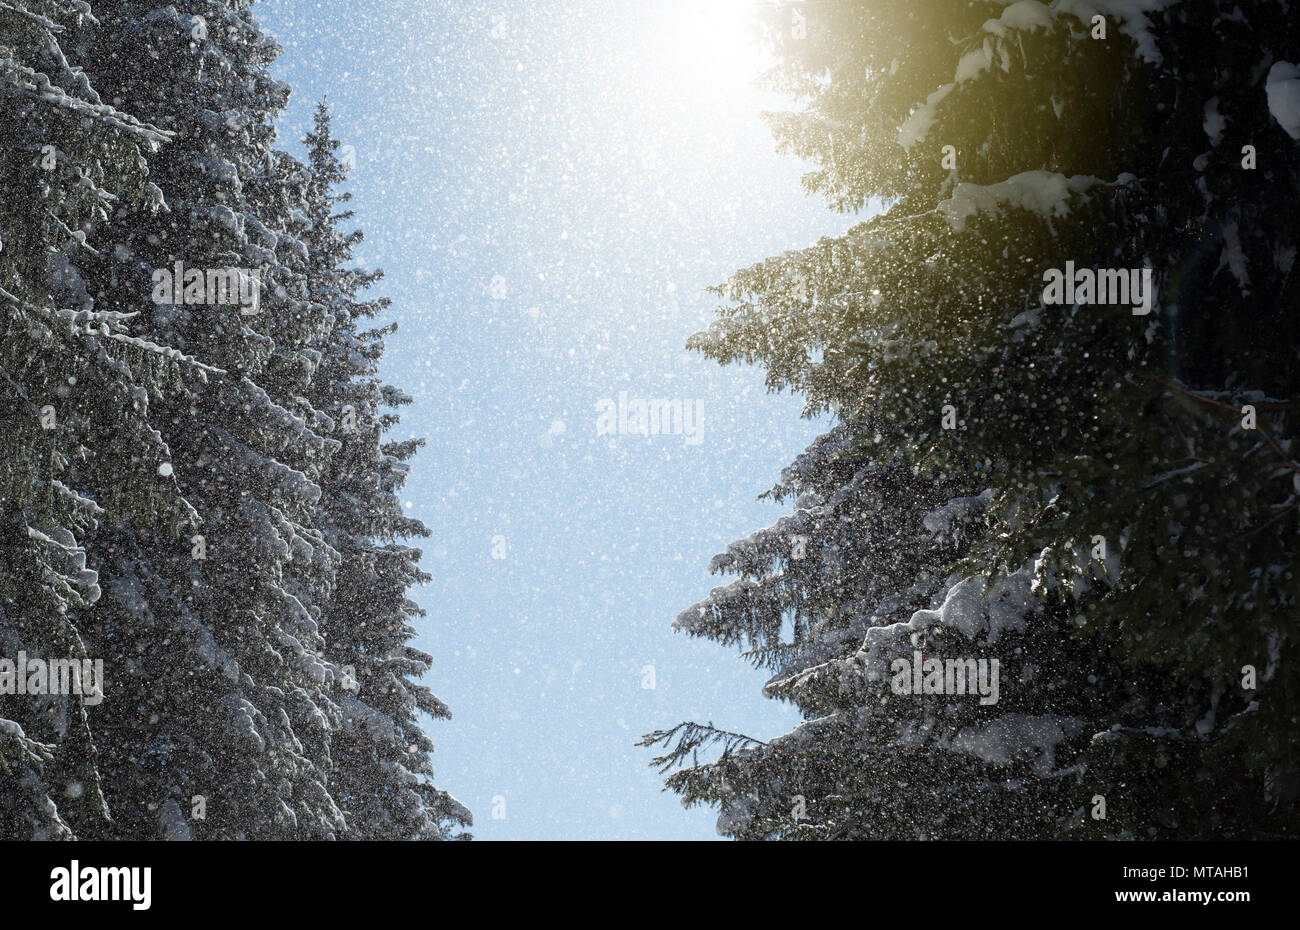 Fresh falling snow flakes fall from lush evergreen pine fir trees and are caught in the warm winter golden rays of sunlight in this wintry woodland sc Stock Photo